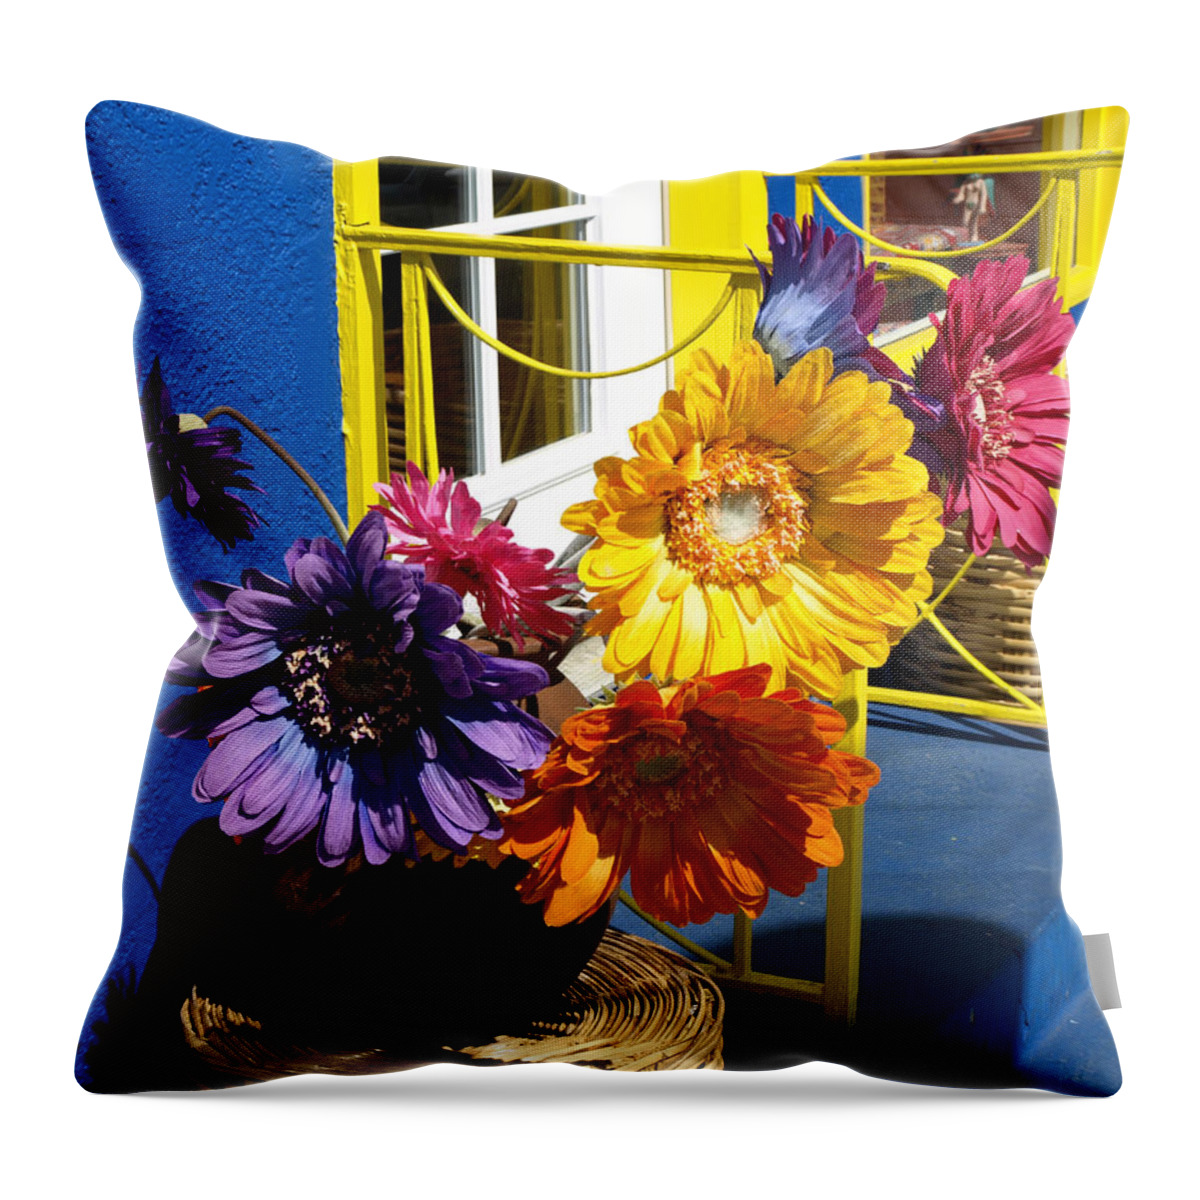 Flowers Throw Pillow featuring the photograph Flores Colores by Gia Marie Houck